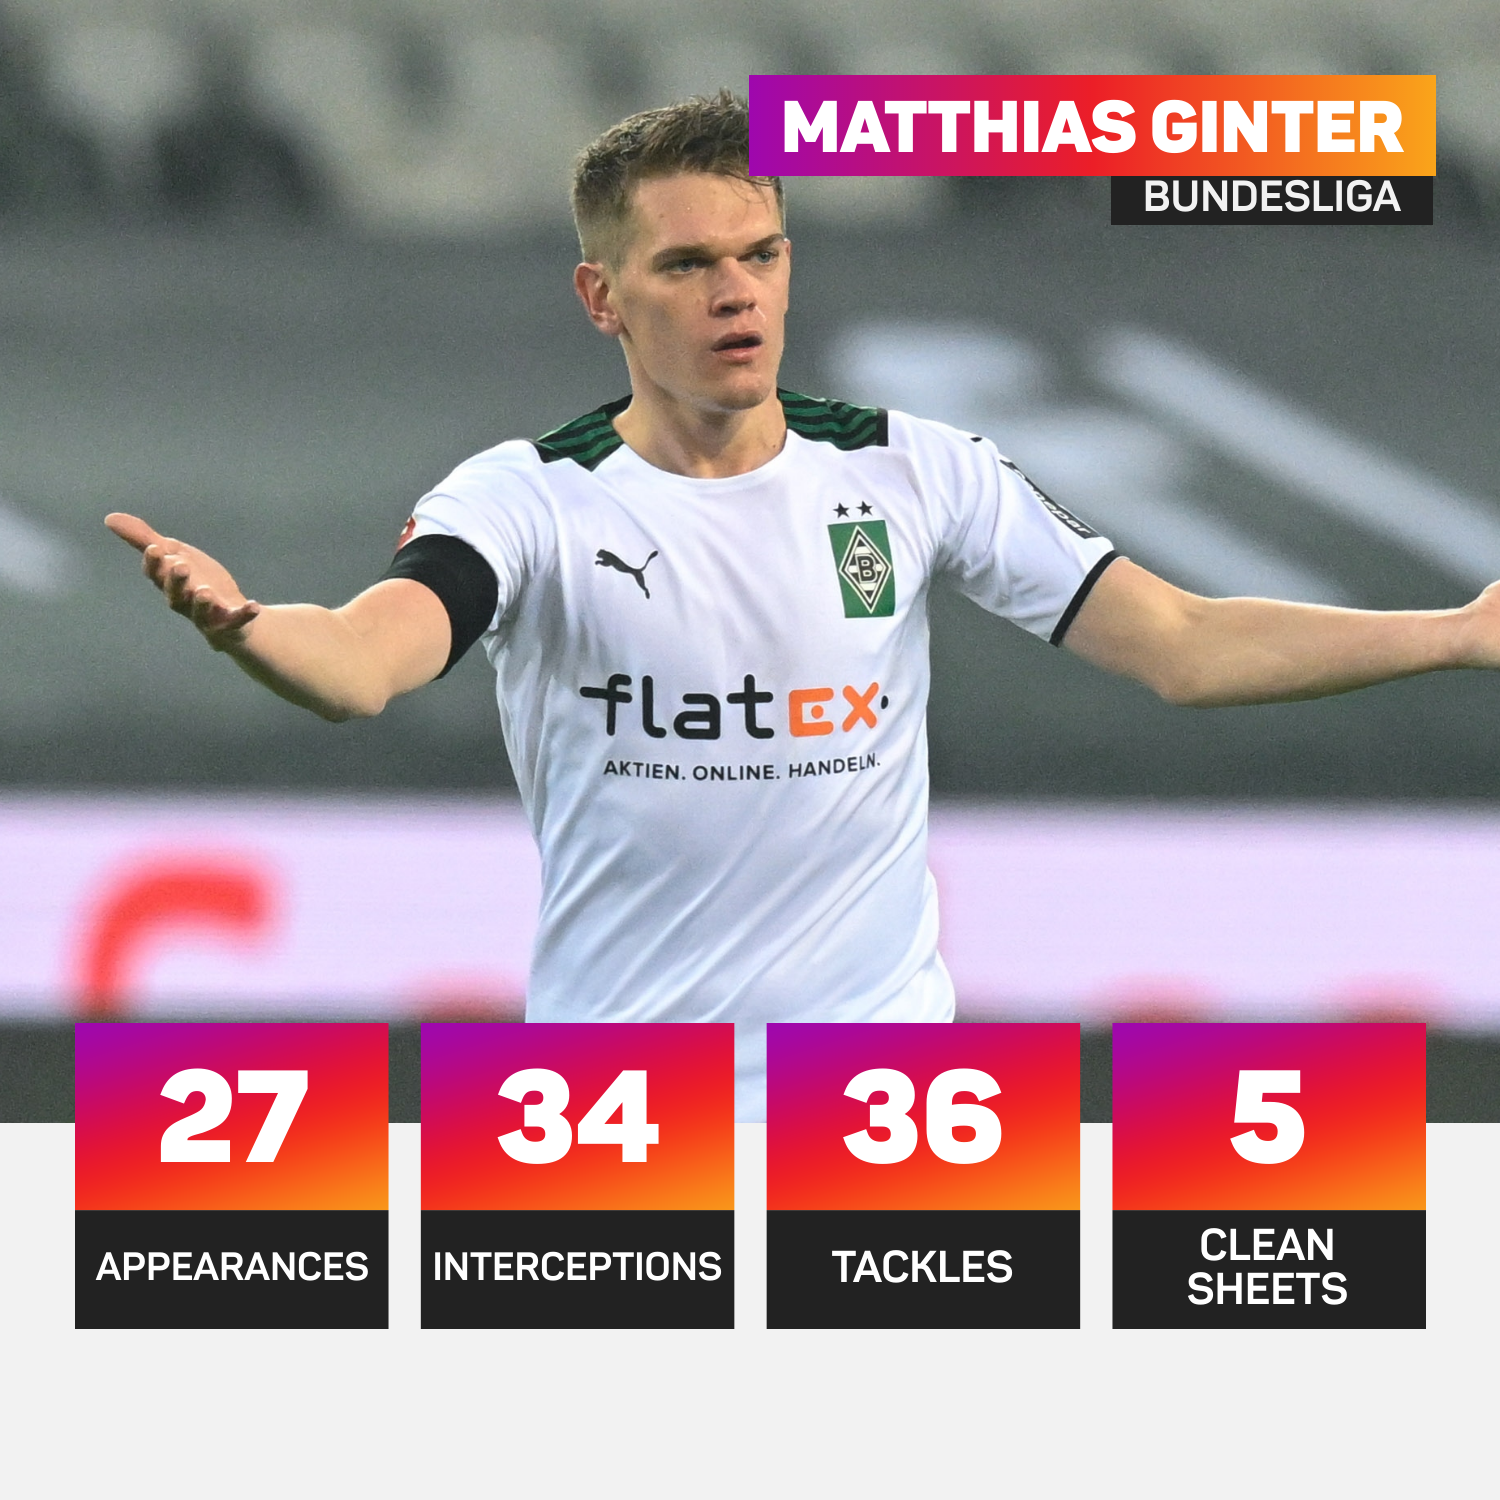 Matthias Ginter has played 27 times in the league this season